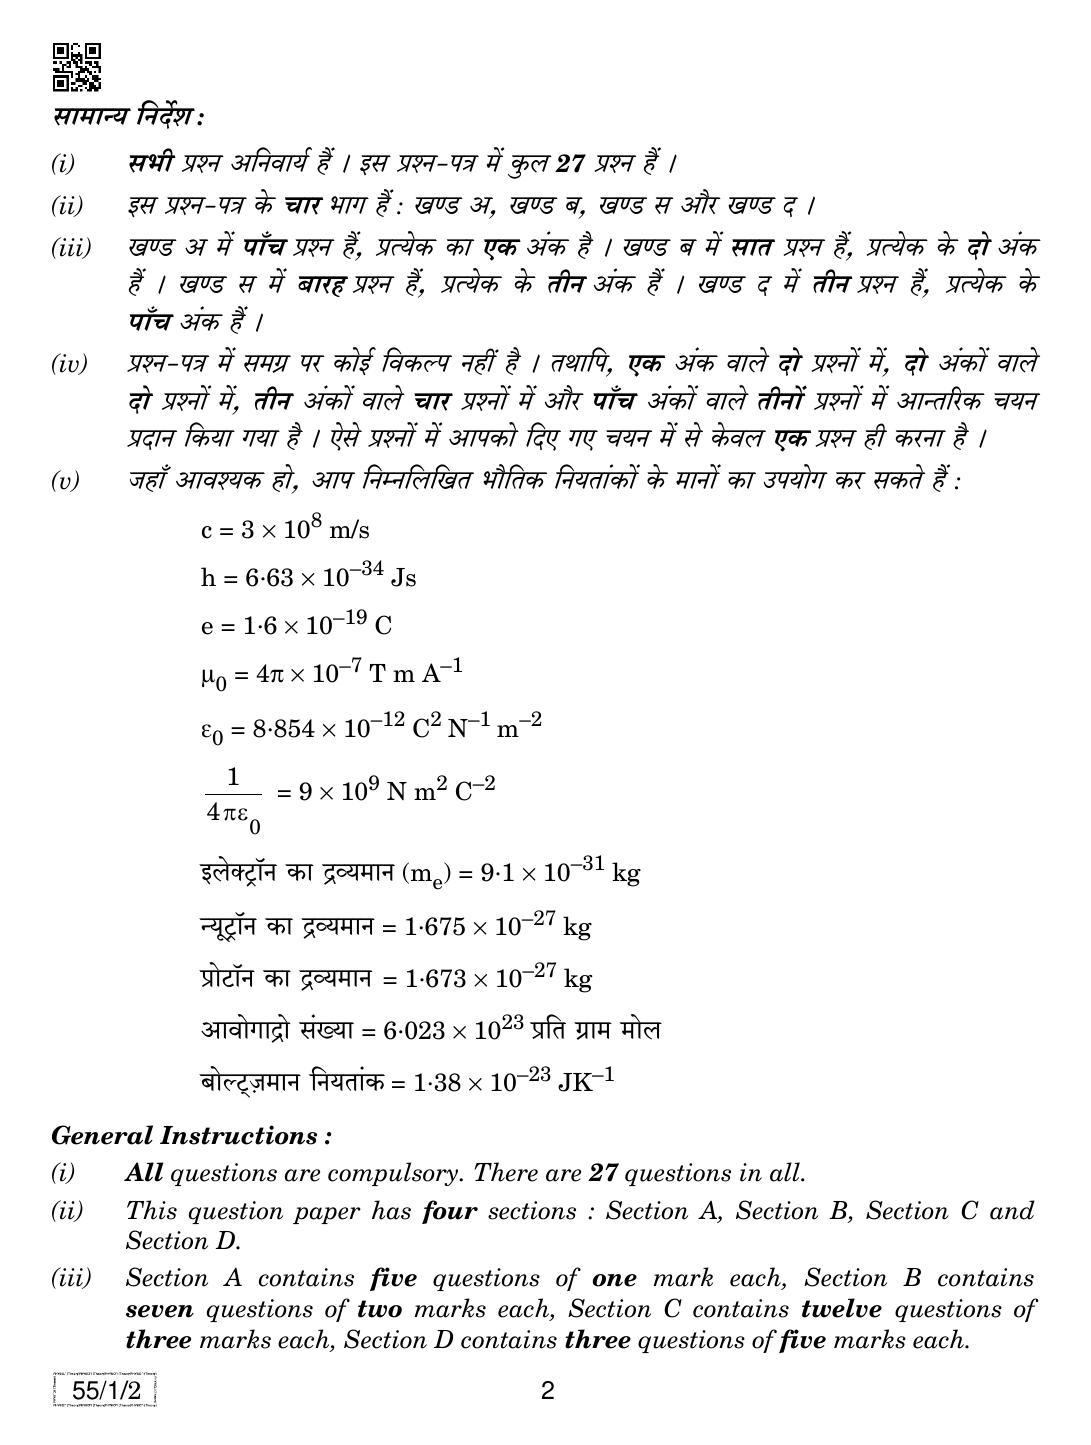 CBSE Class 12 55-1-2 PHYSICS 2019 Compartment Question Paper - Page 2